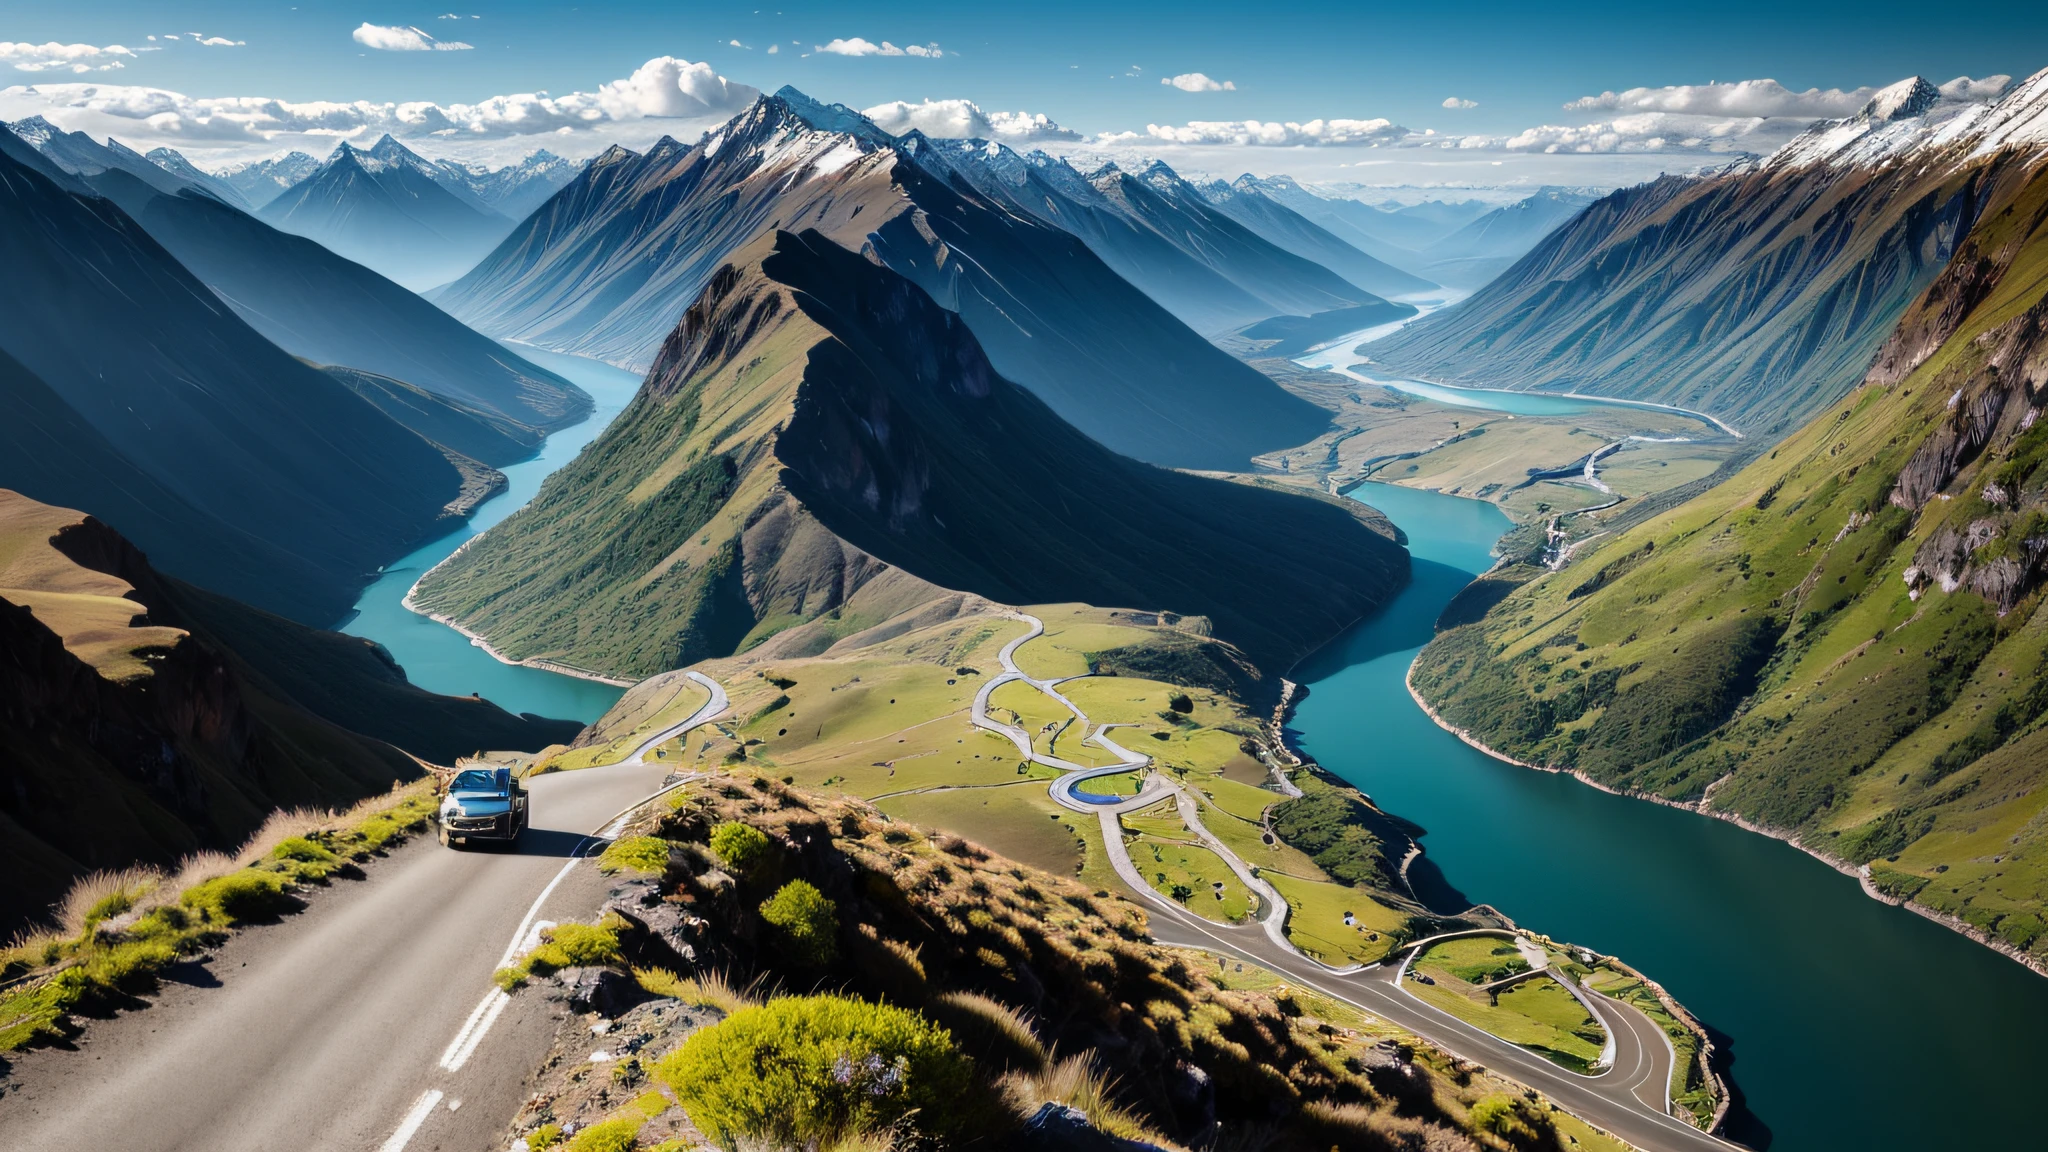 mountains with a river and a road in the middle of them, a detailed matte painting by Etienne Delessert, unsplash contest winner, visual art, new zealand, overlooking a valley, canada, looking down on the view, futuristic valley, breathtaking scenery, ryan dyar, looking down at the valley, new zealand landscape, in an epic valley, breathtaking landscape